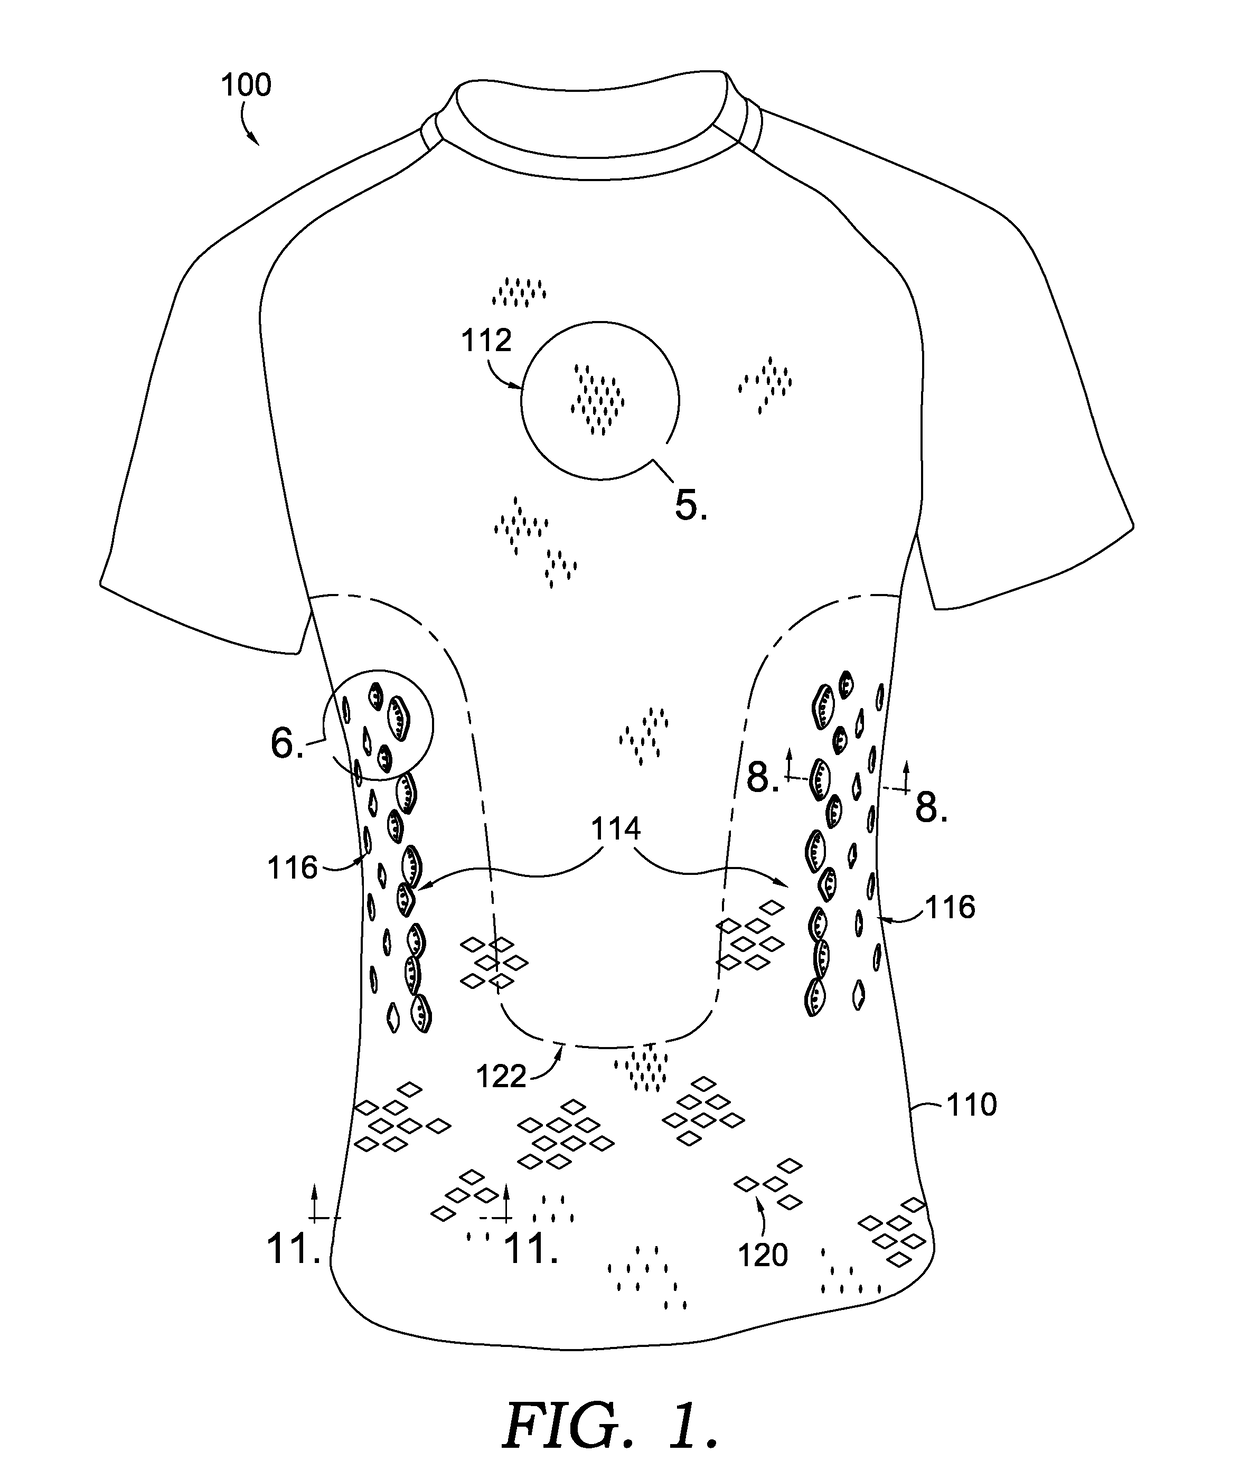 Apparel item configured for reduced cling perception